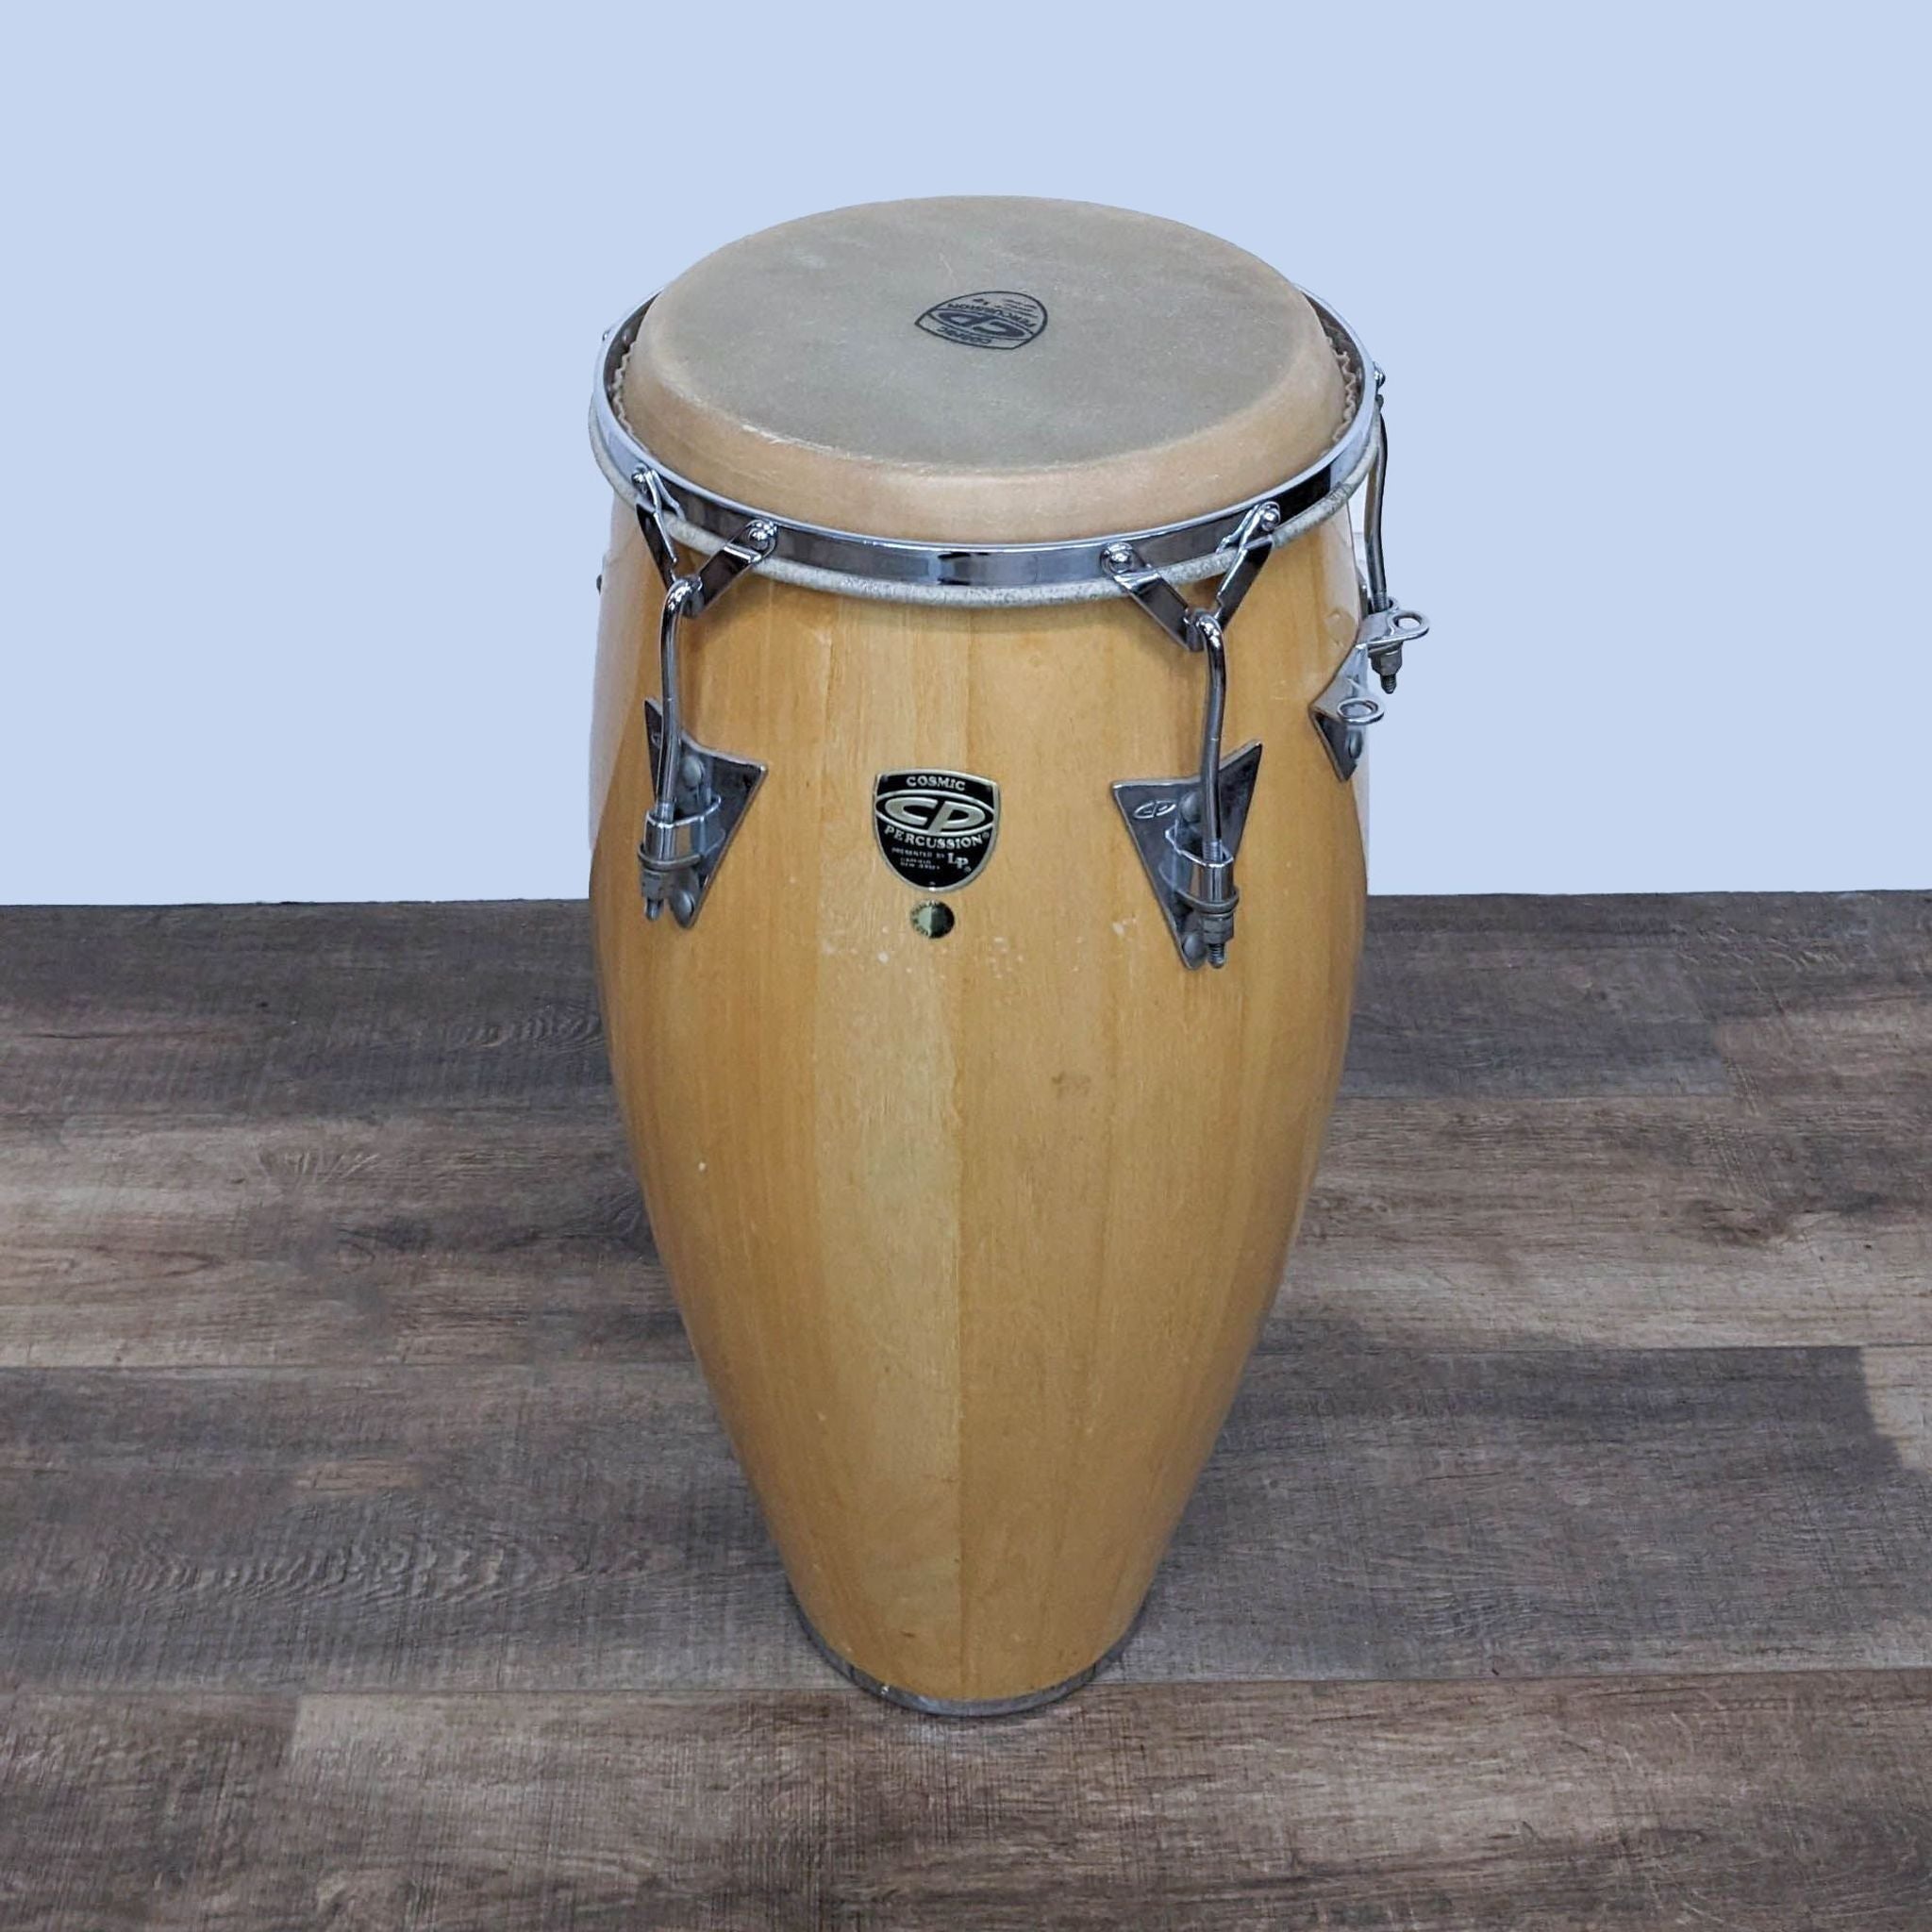 Alt text 1: A single Cosmic Percussion wooden conga drum with natural skin head and chrome hardware, stickered, against a wooden floor backdrop.